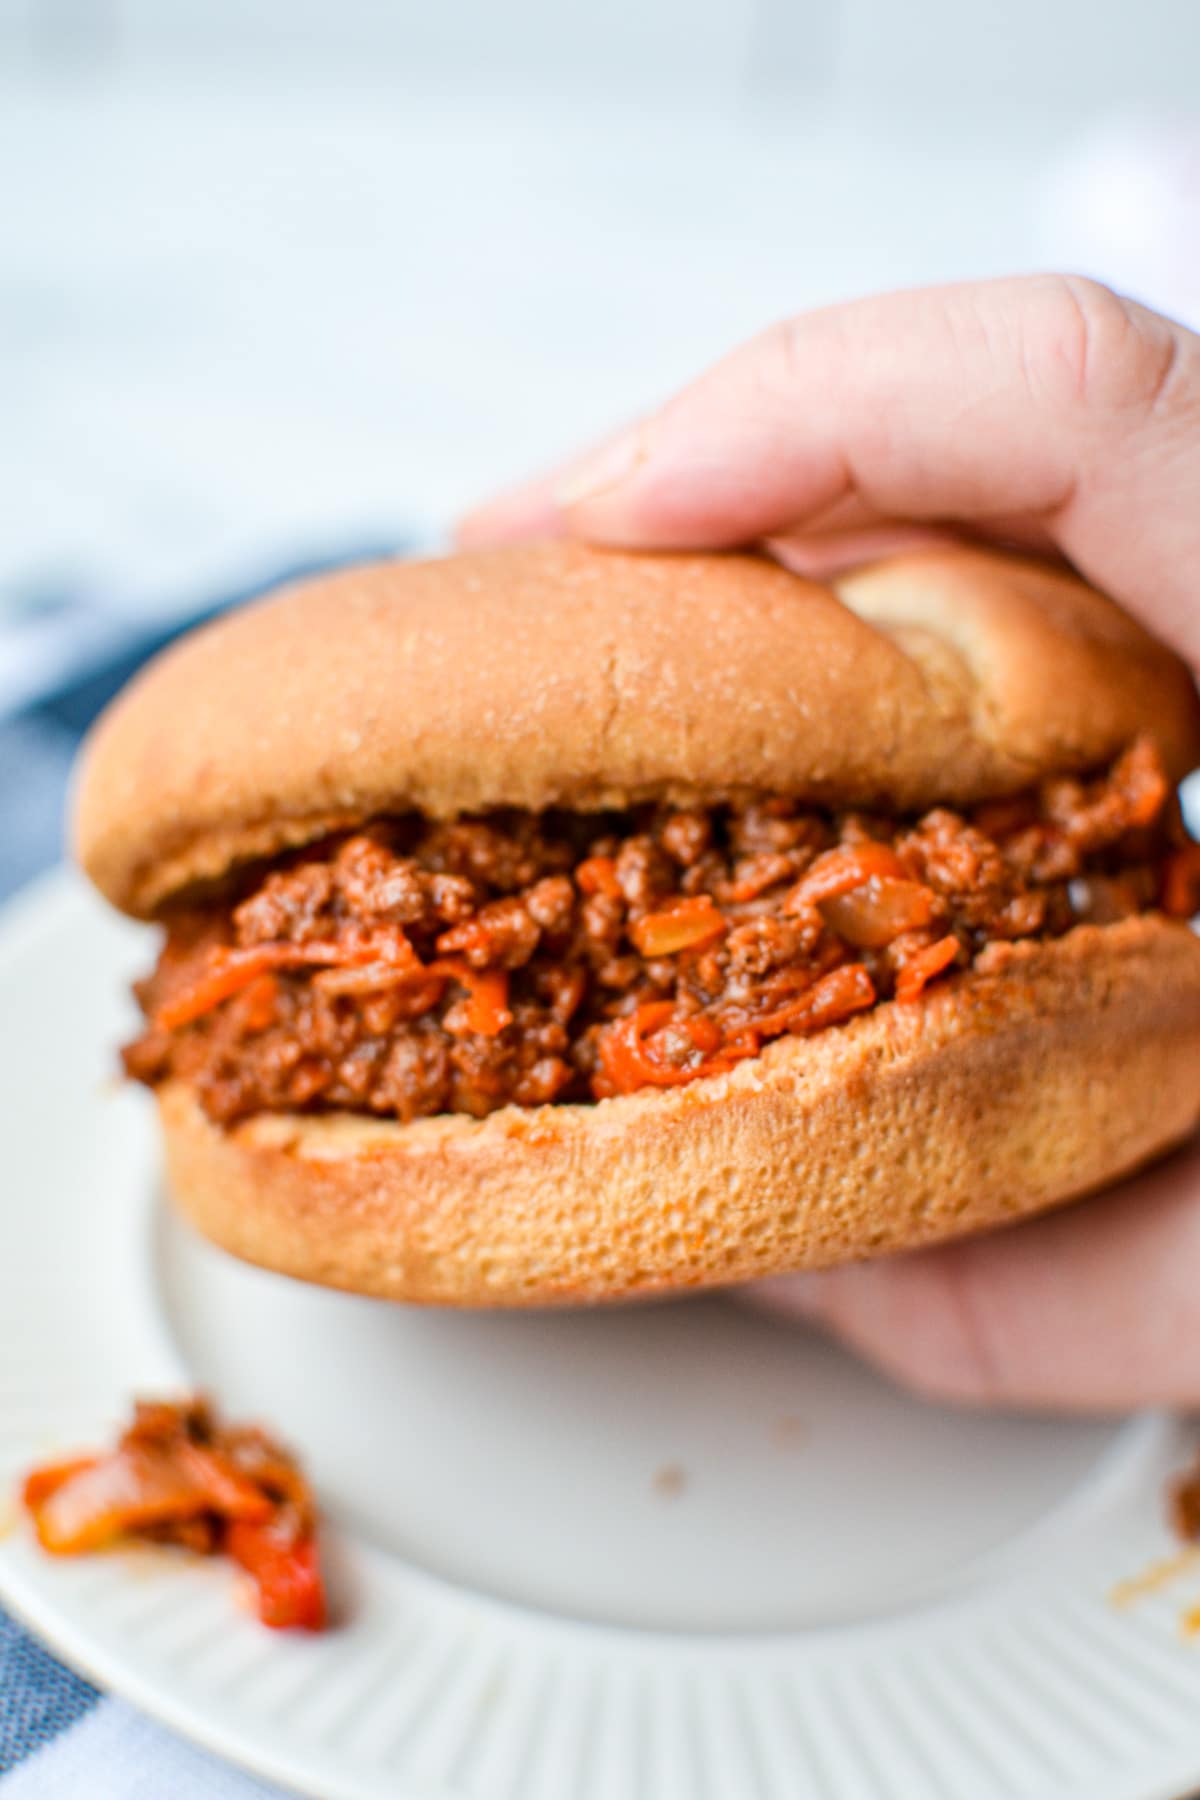 A close up of a sloppy joe with shredded carrot inside.